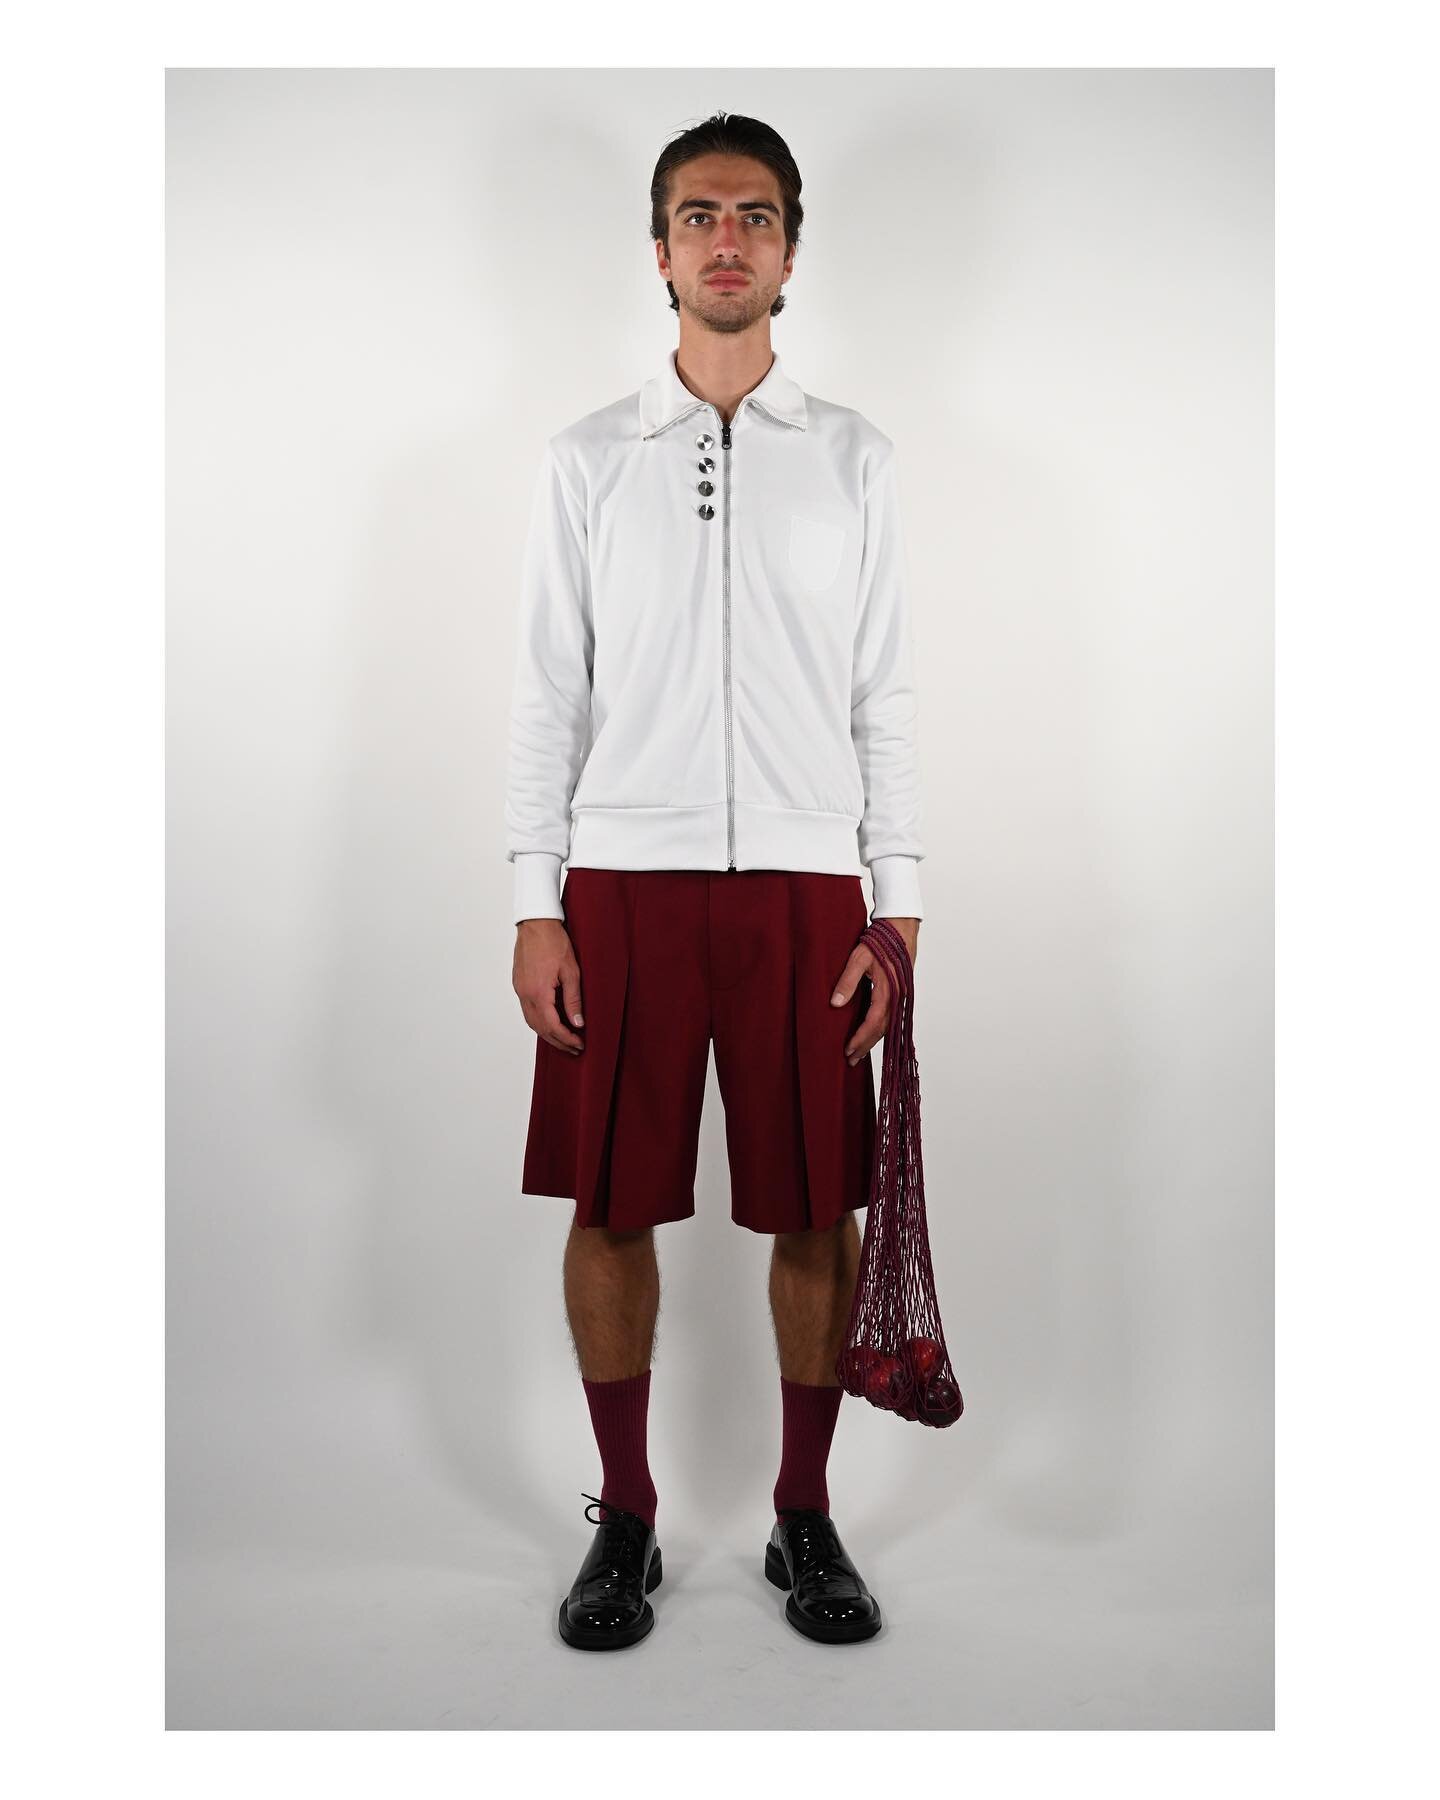 Look 1: Our Reversable Track Jacket and Inverted Pleated Burgundy Shorts. 

This design draws inspiration from the complex nature of identity and loyalty in sports, particularly football, and incorporates elements from both German and Turkish uniform